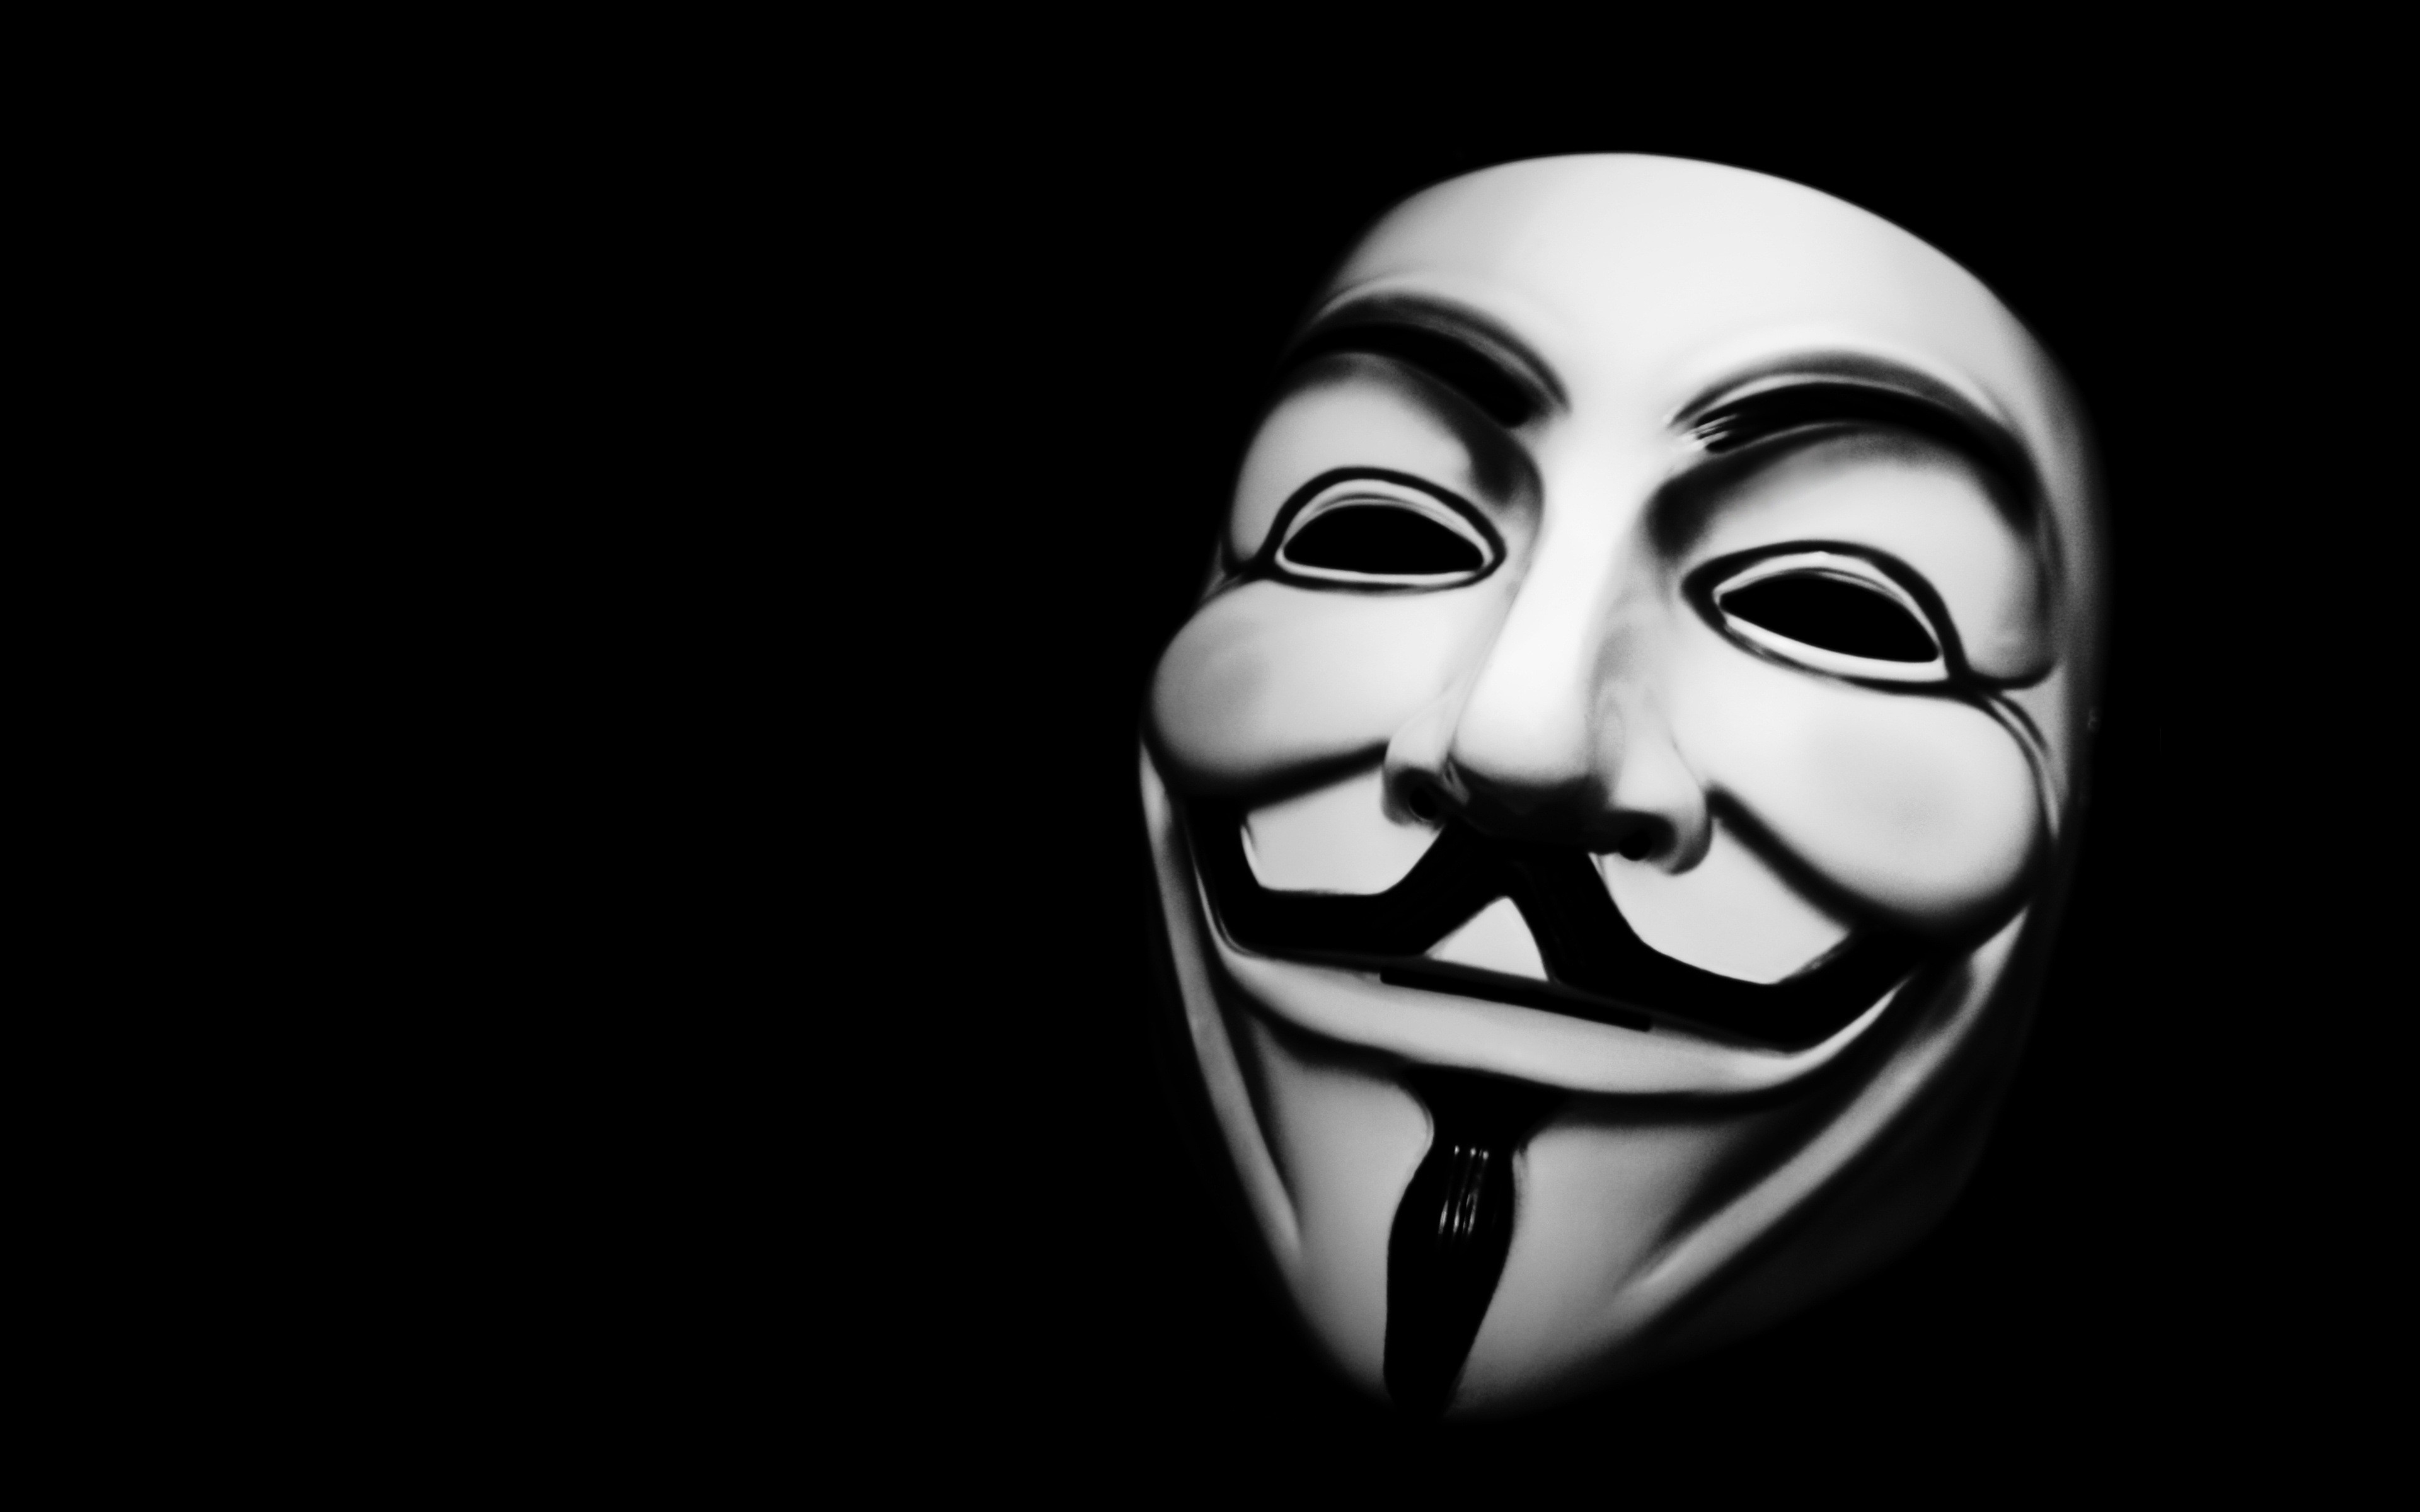 Anonymous V for Vendetta Mask Wallpapers HD / Desktop and Mobile Backgrounds